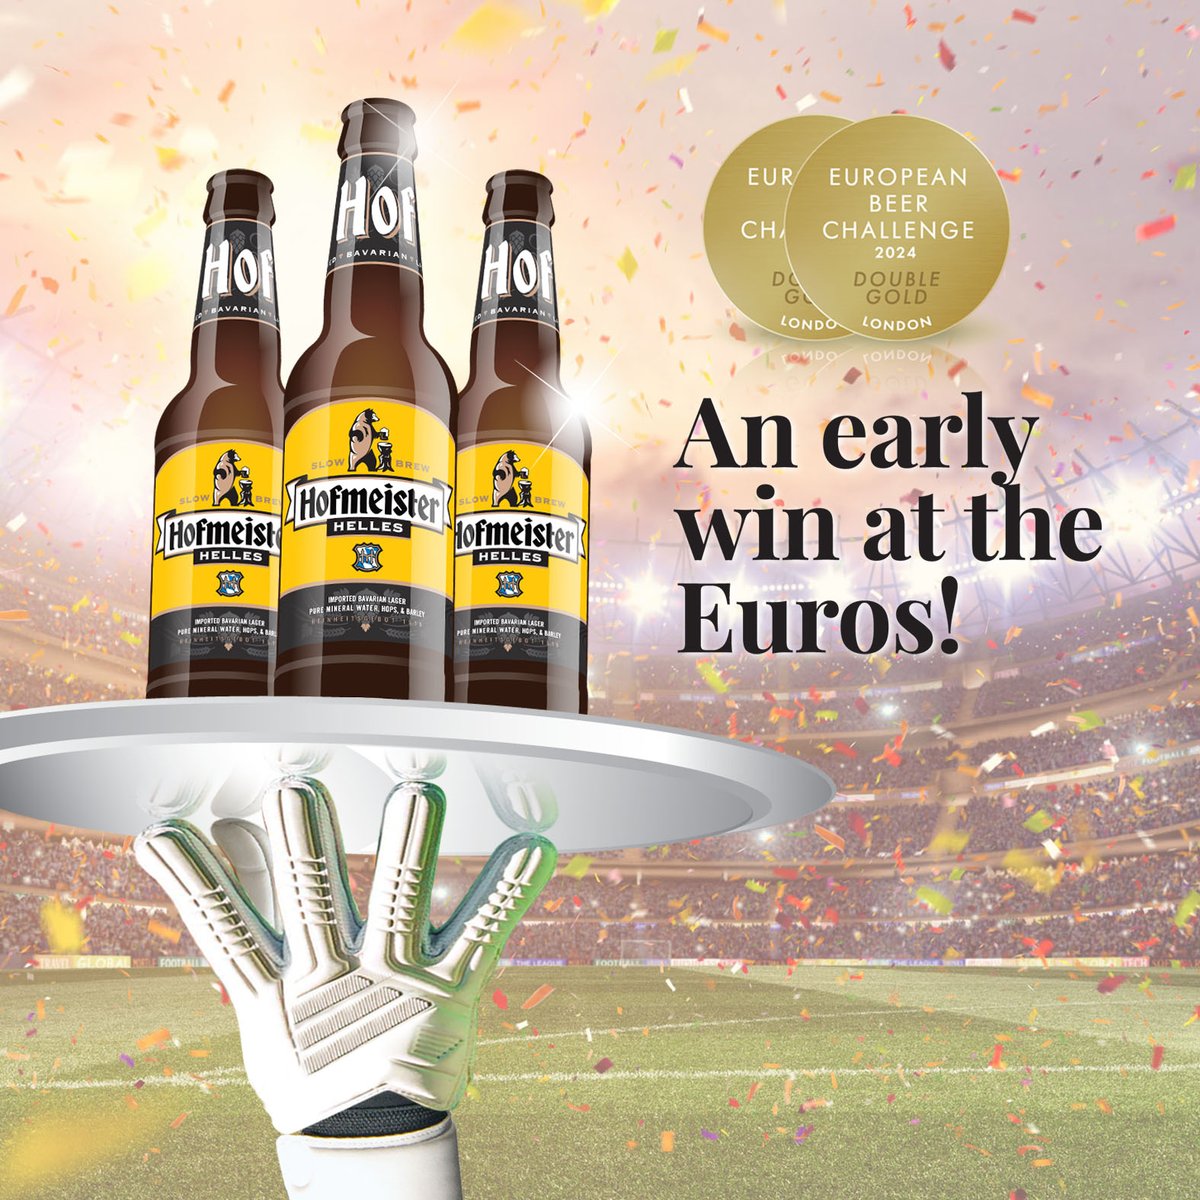 Hot off the press... Hof brings it home at the Euros 🏅 Yet another top win for our world-beating Helles in the European Beer Challenge as we take a double gold in this year's competition - our sixth gold for the past six years. #FollowTheBear #Winning #EuropeanBeerChallenge